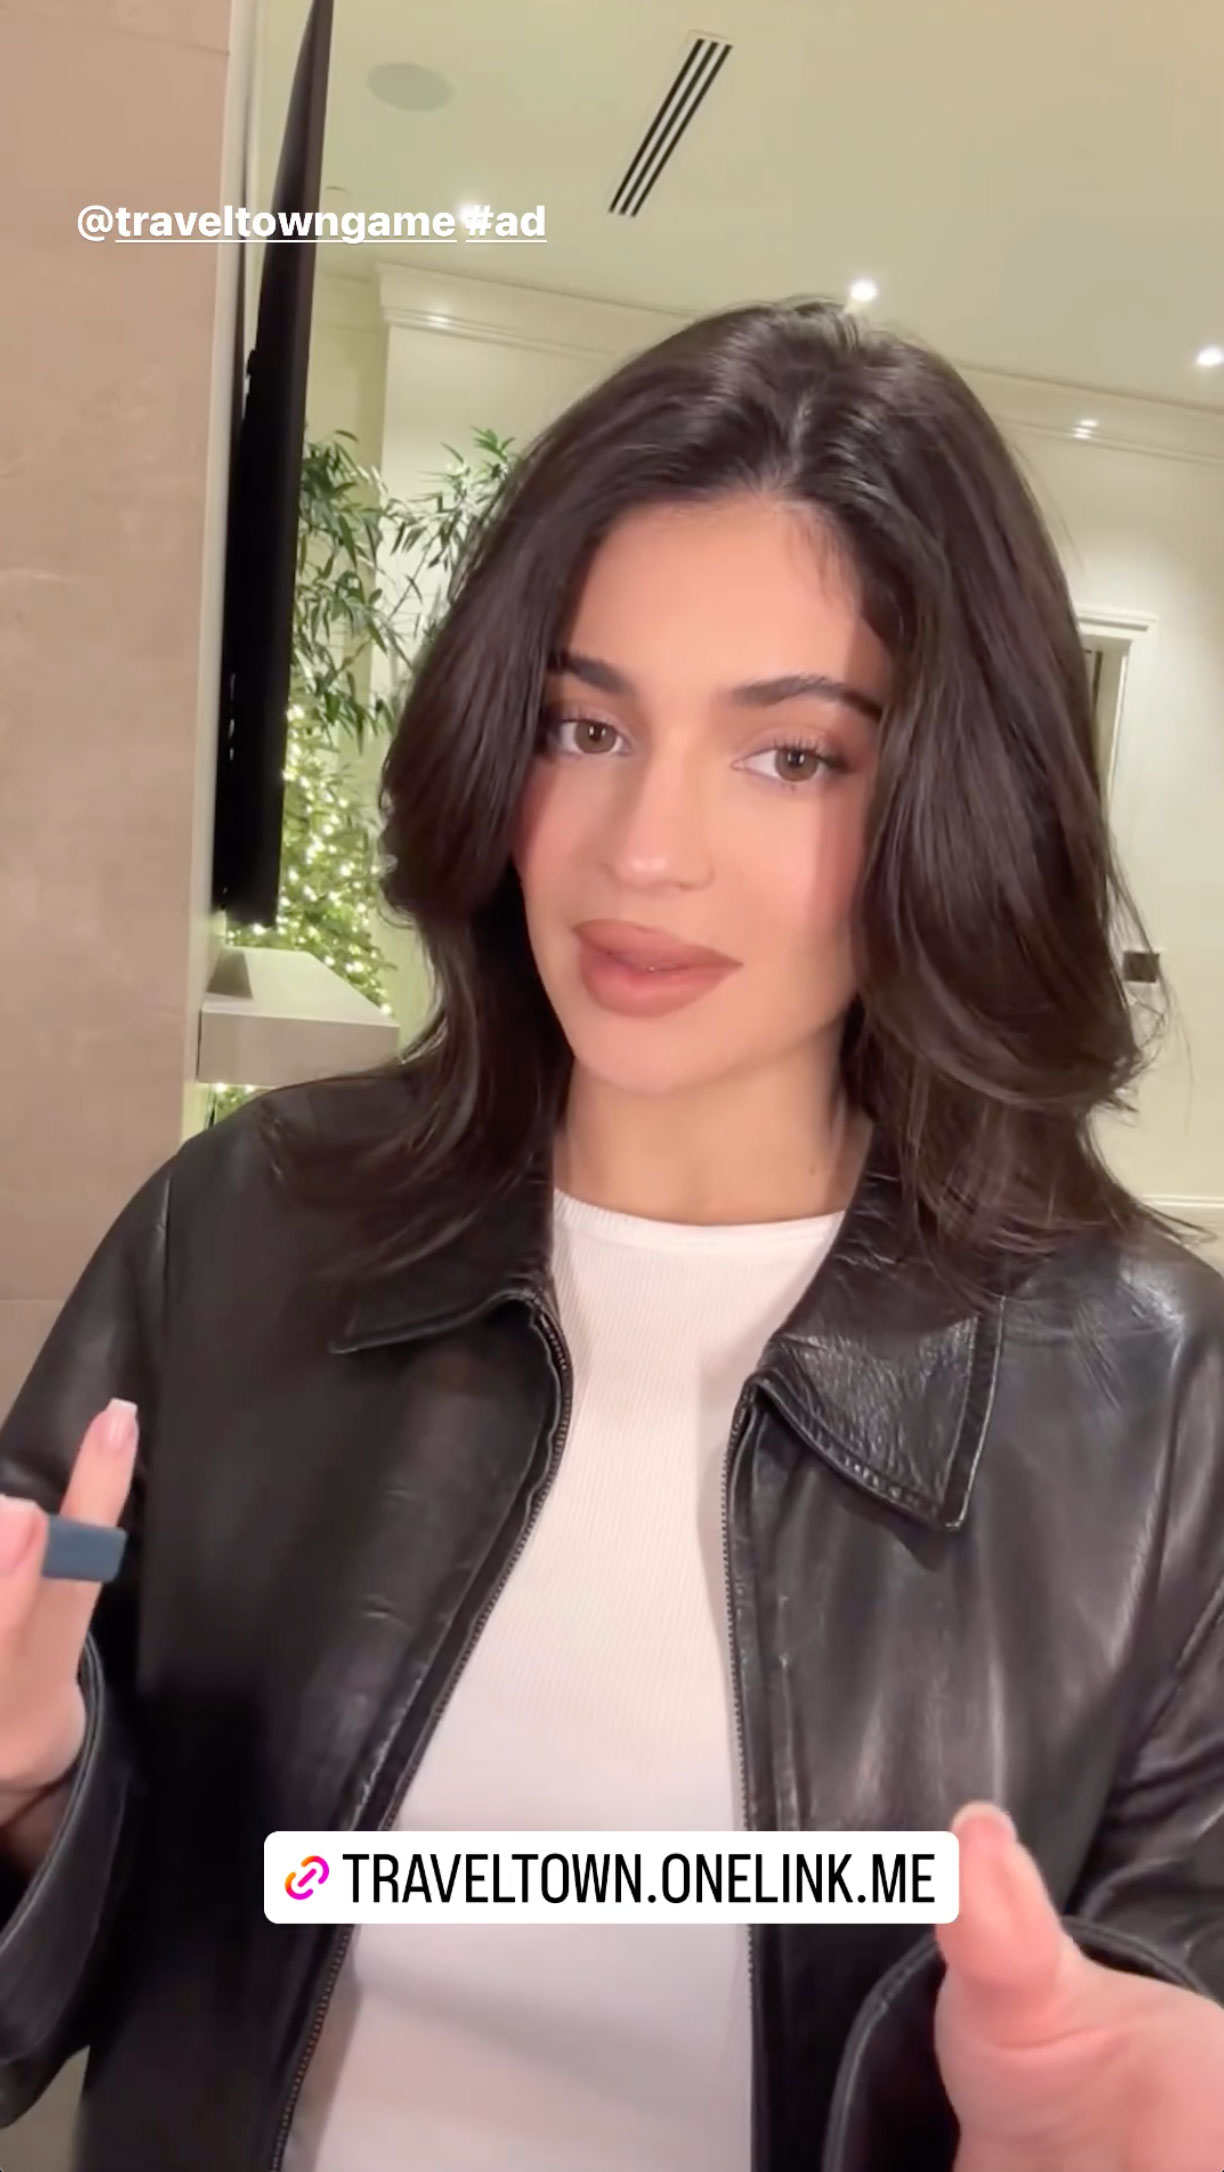 Kylie showed off a new short hairstyle on social media